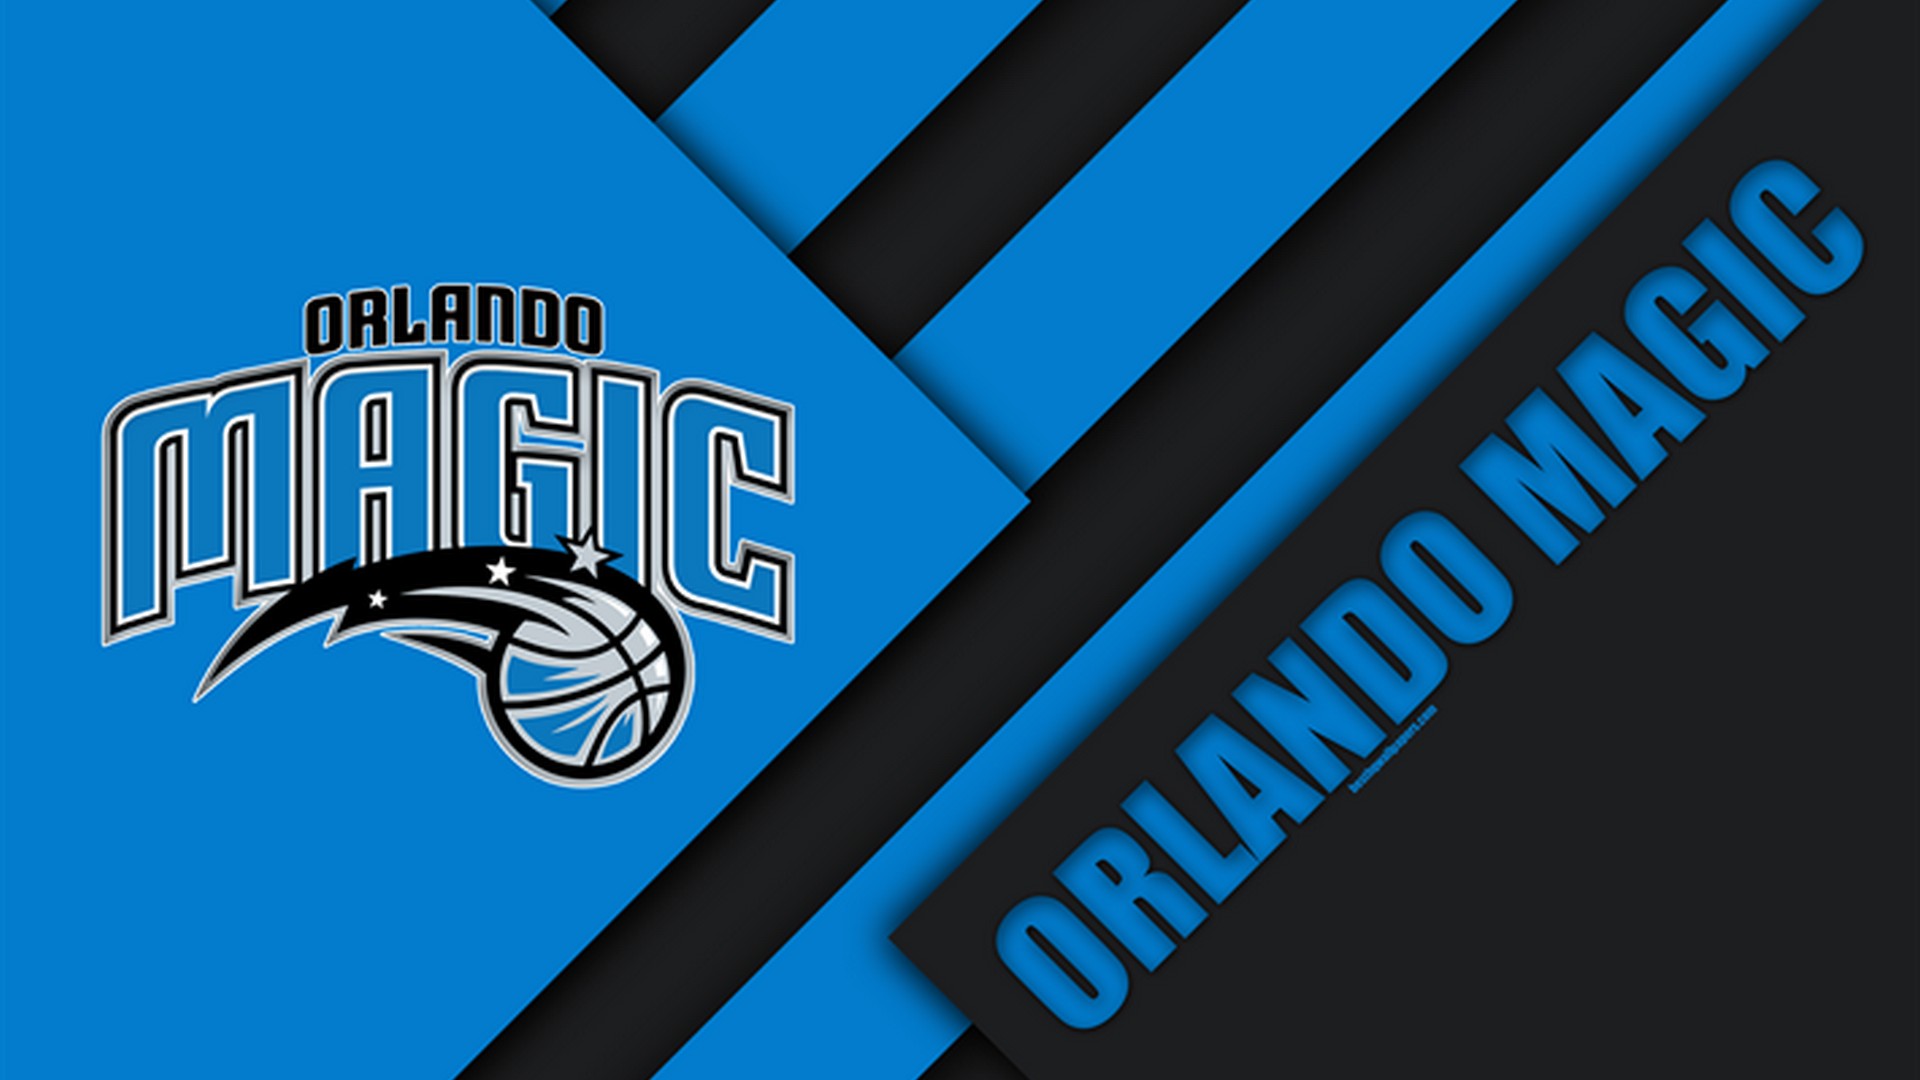 Wallpaper Desktop Orlando Magic NBA HD with high-resolution 1920x1080 pixel. You can use this wallpaper for your Desktop Computer Backgrounds, Windows or Mac Screensavers, iPhone Lock screen, Tablet or Android and another Mobile Phone device